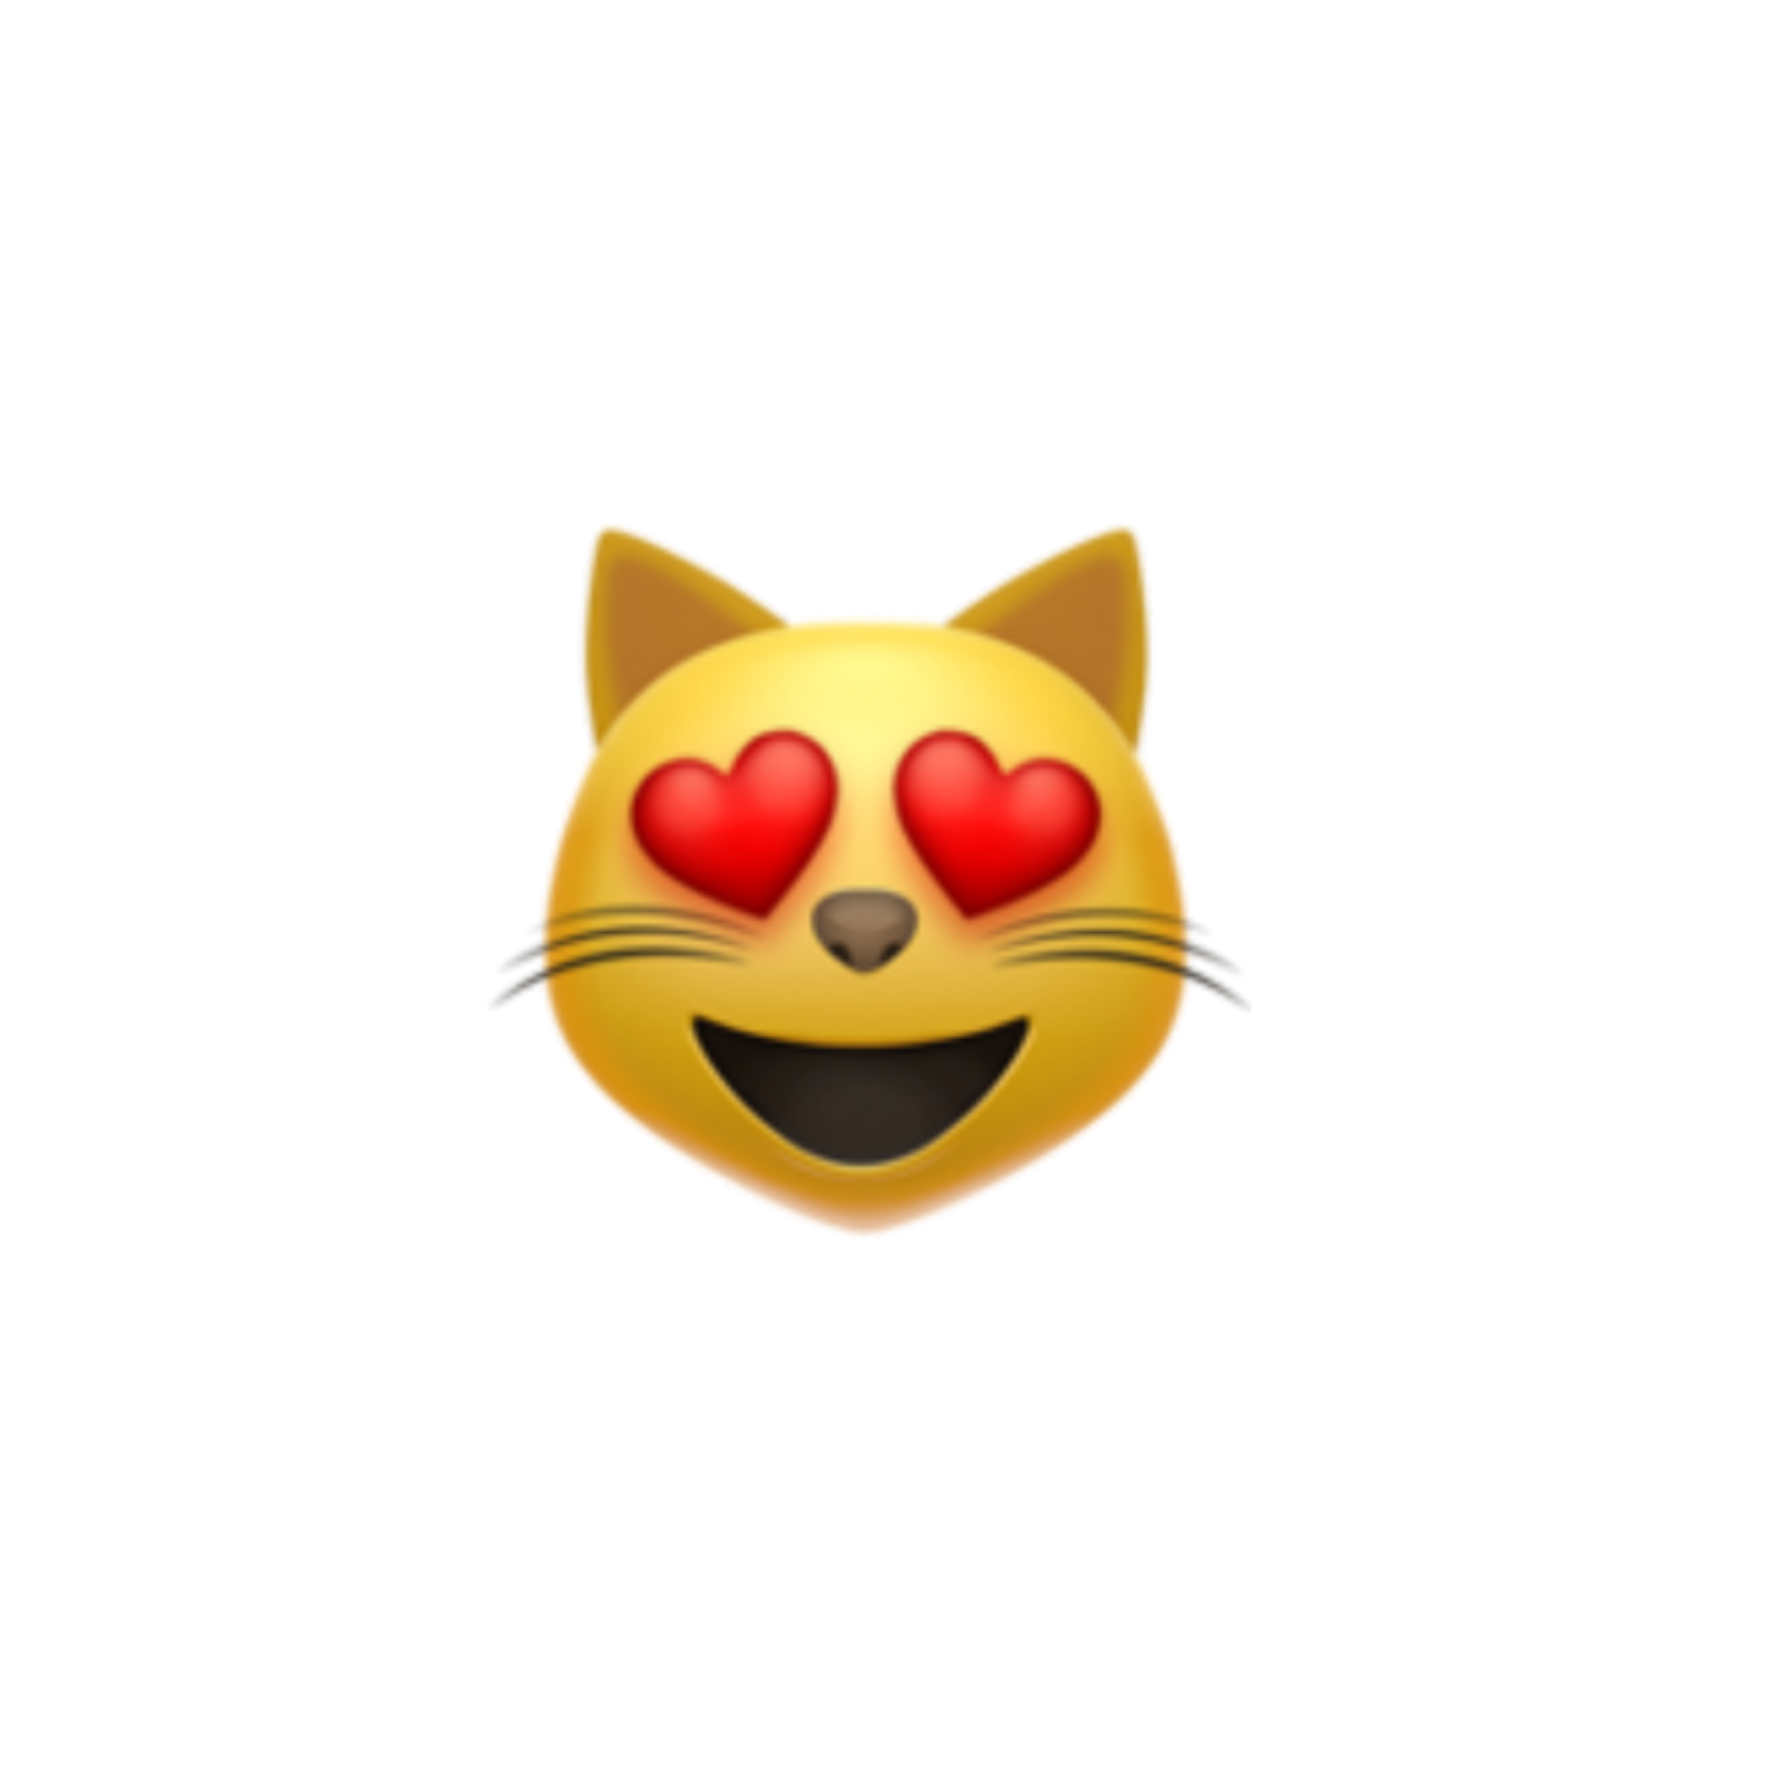 This visual is about catface cat emojicat heartcat emojis freetoedit #catfa...